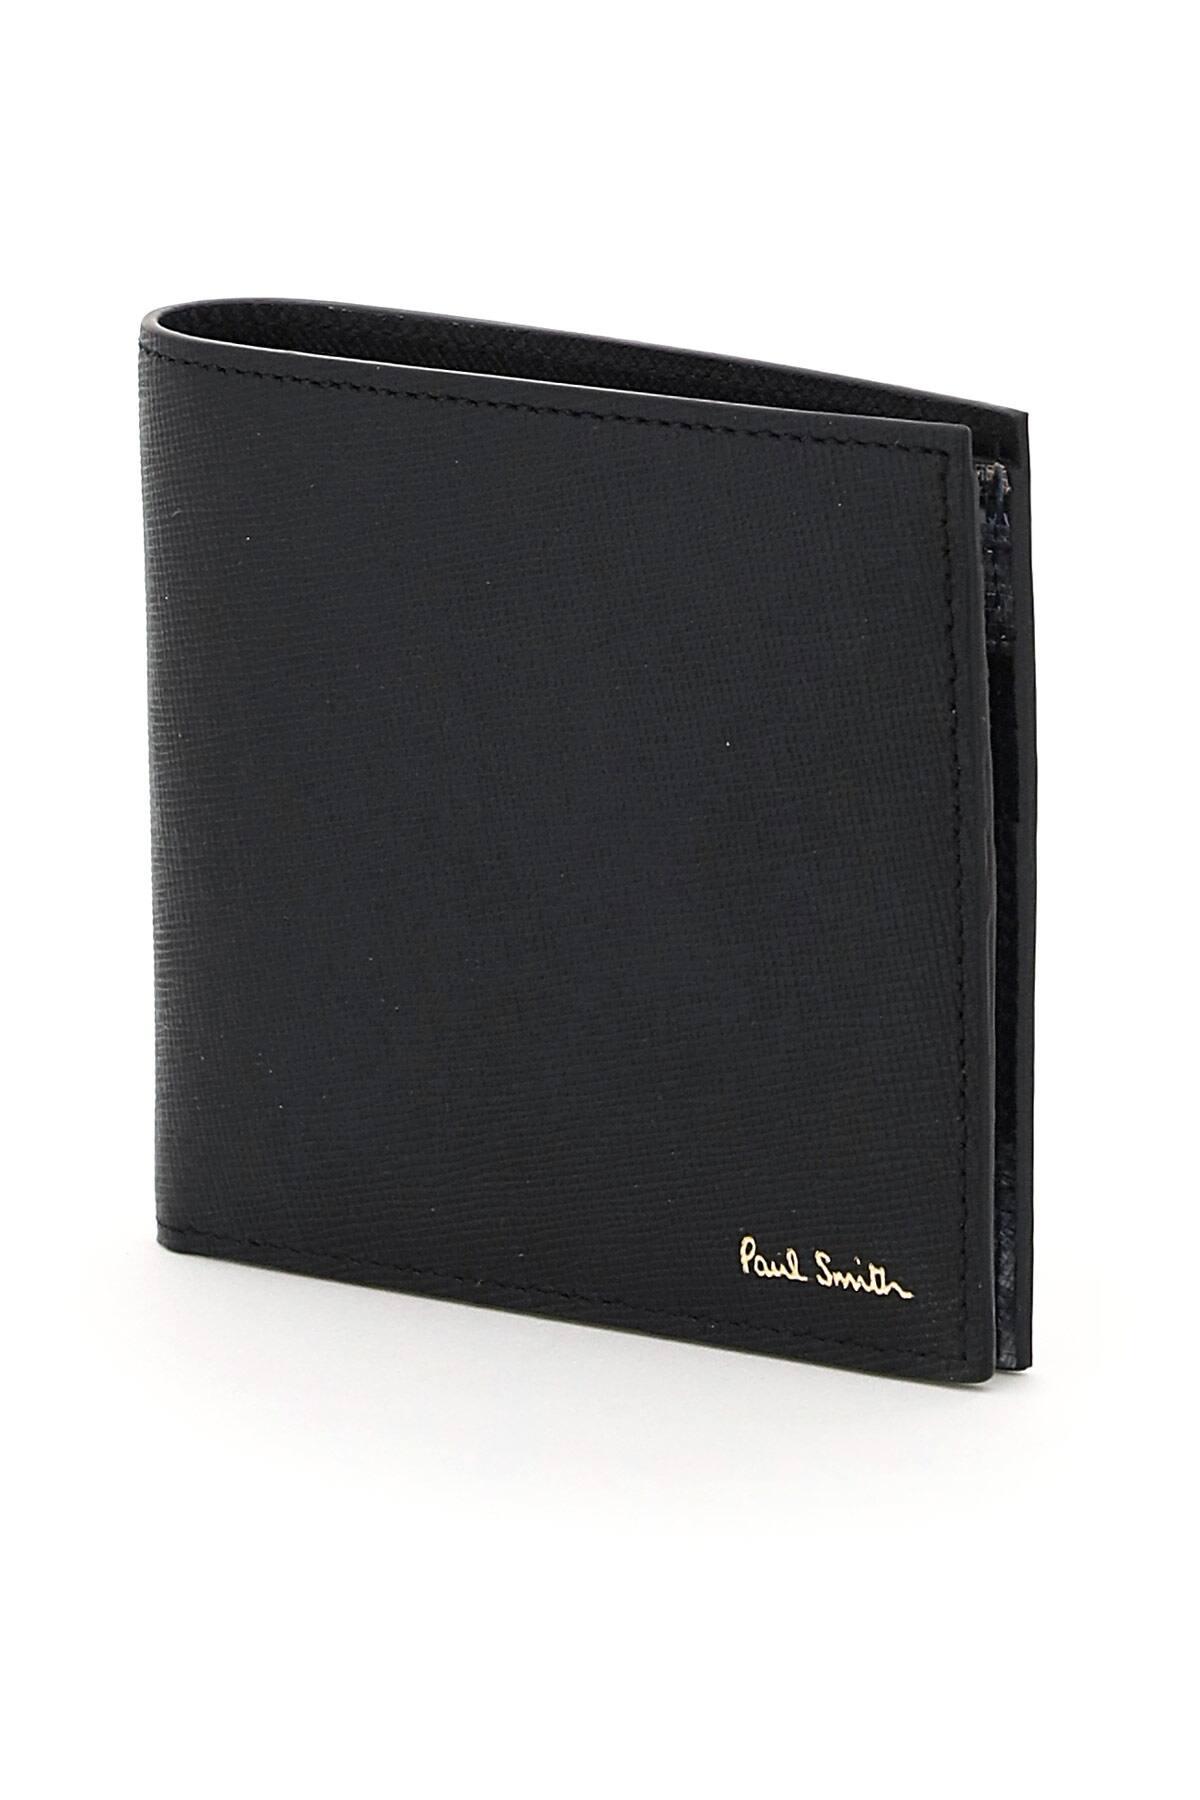 Paul Smith Graphic-print Leather Billfold Wallet in Black for Men 